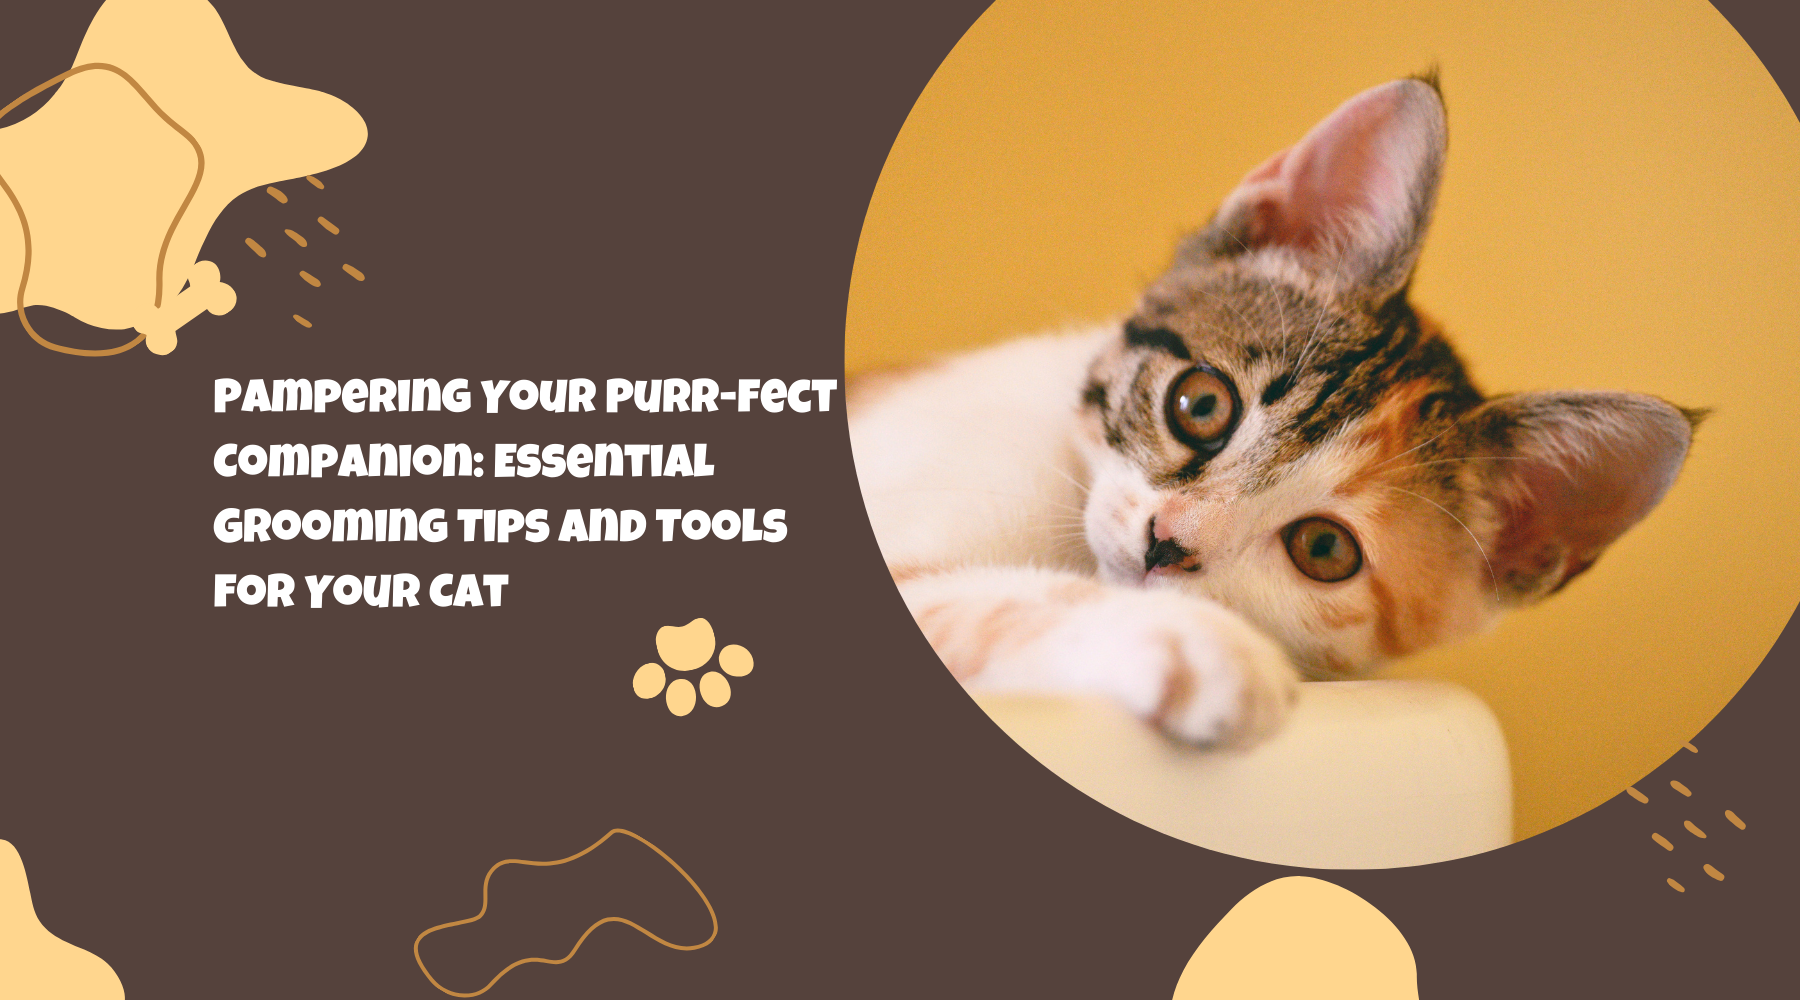 Pampering Your Purr-fect Companion: Essential Grooming Tips and Tools for Your Cat